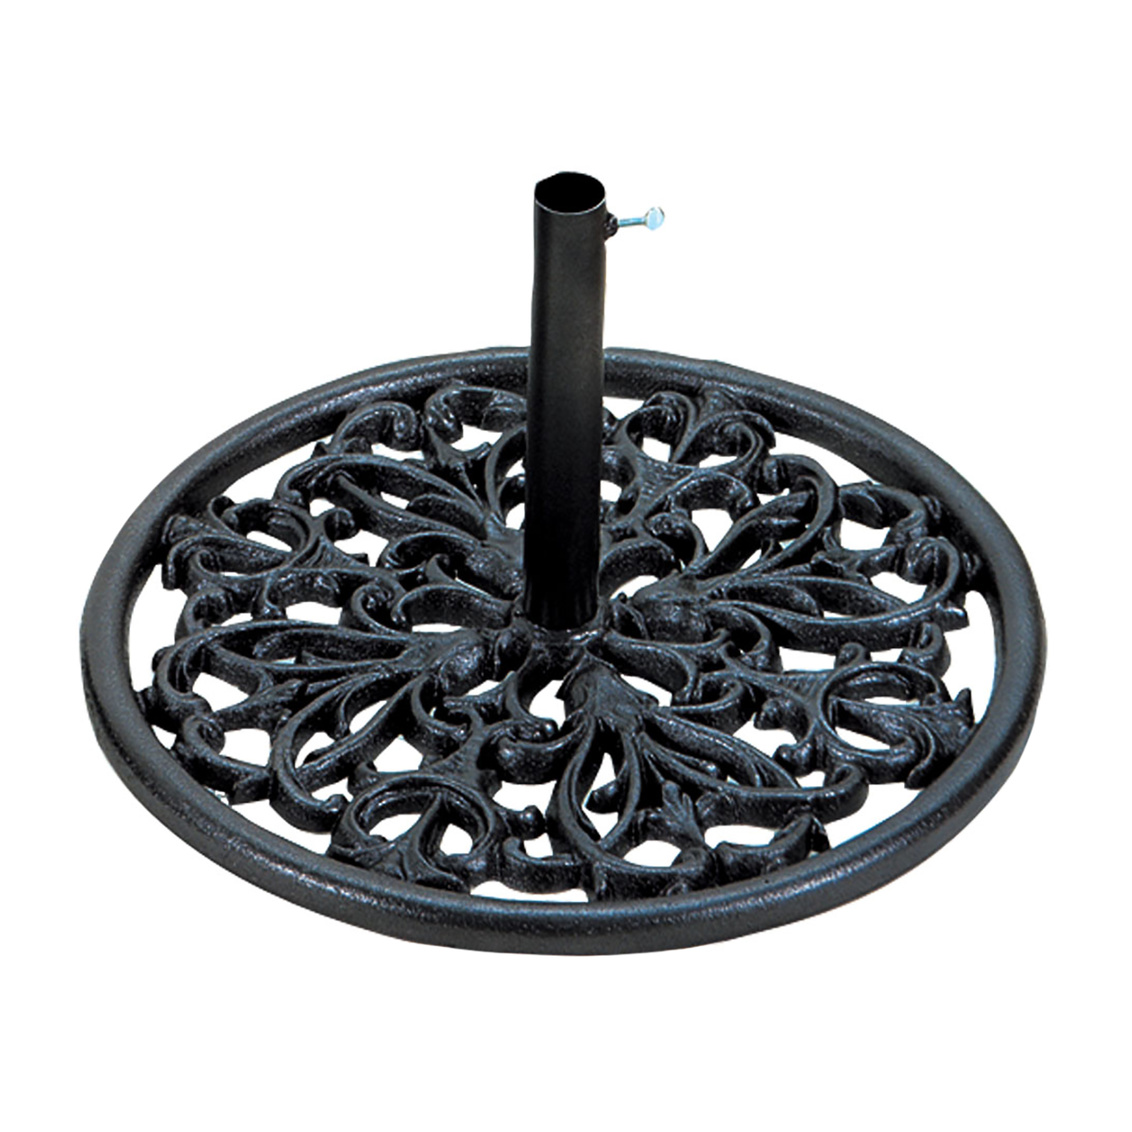 50 lbs florentine 12 inch umbrella base in ancient earth product image